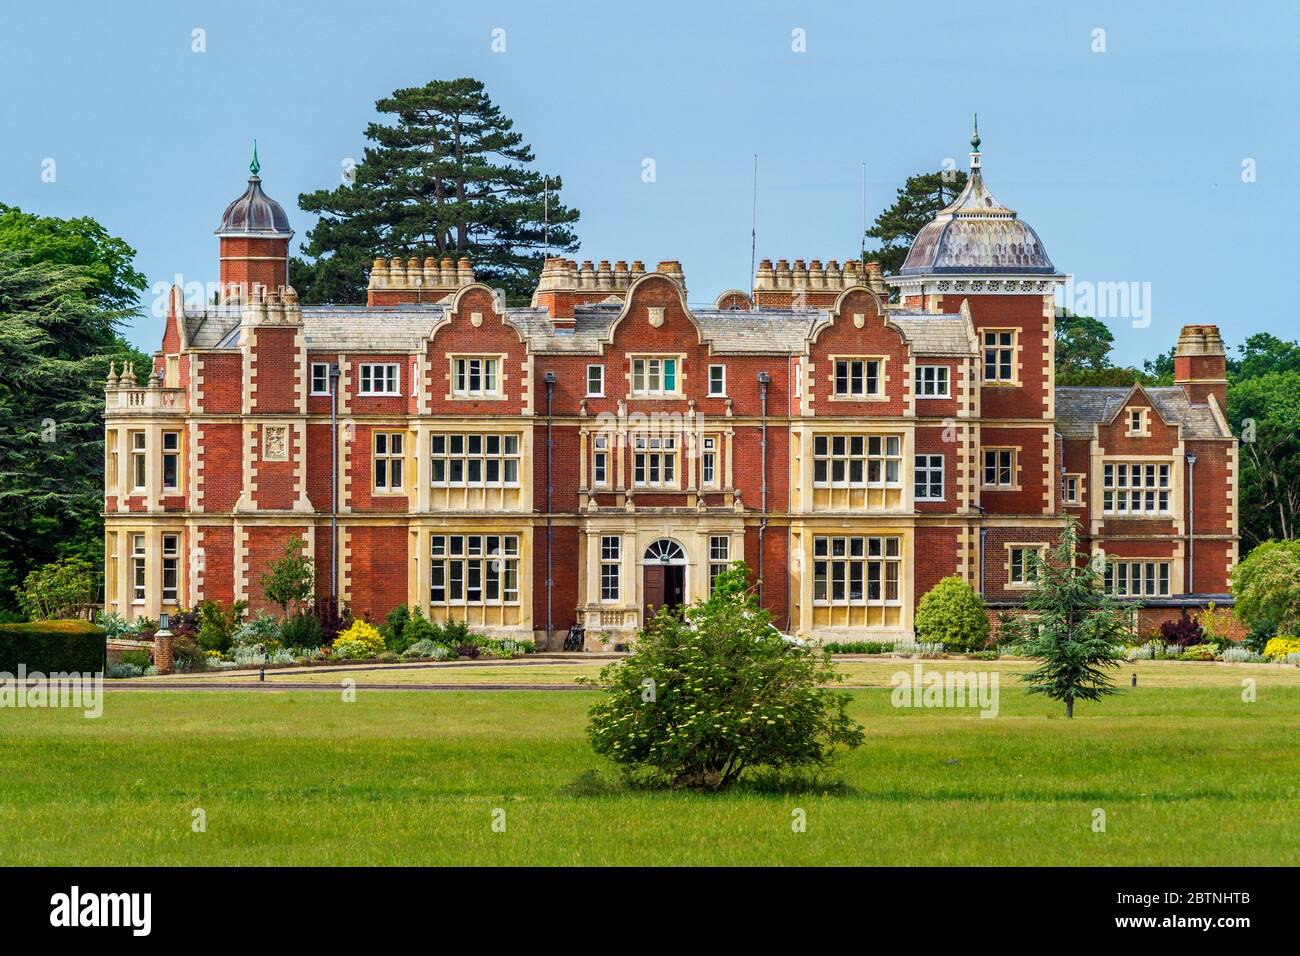 Babraham Hall at the Babraham Institute Cambridge a life sciences research institution on the Babraham Research Campus. Architect Philip Hardwick 1837 Stock Photo